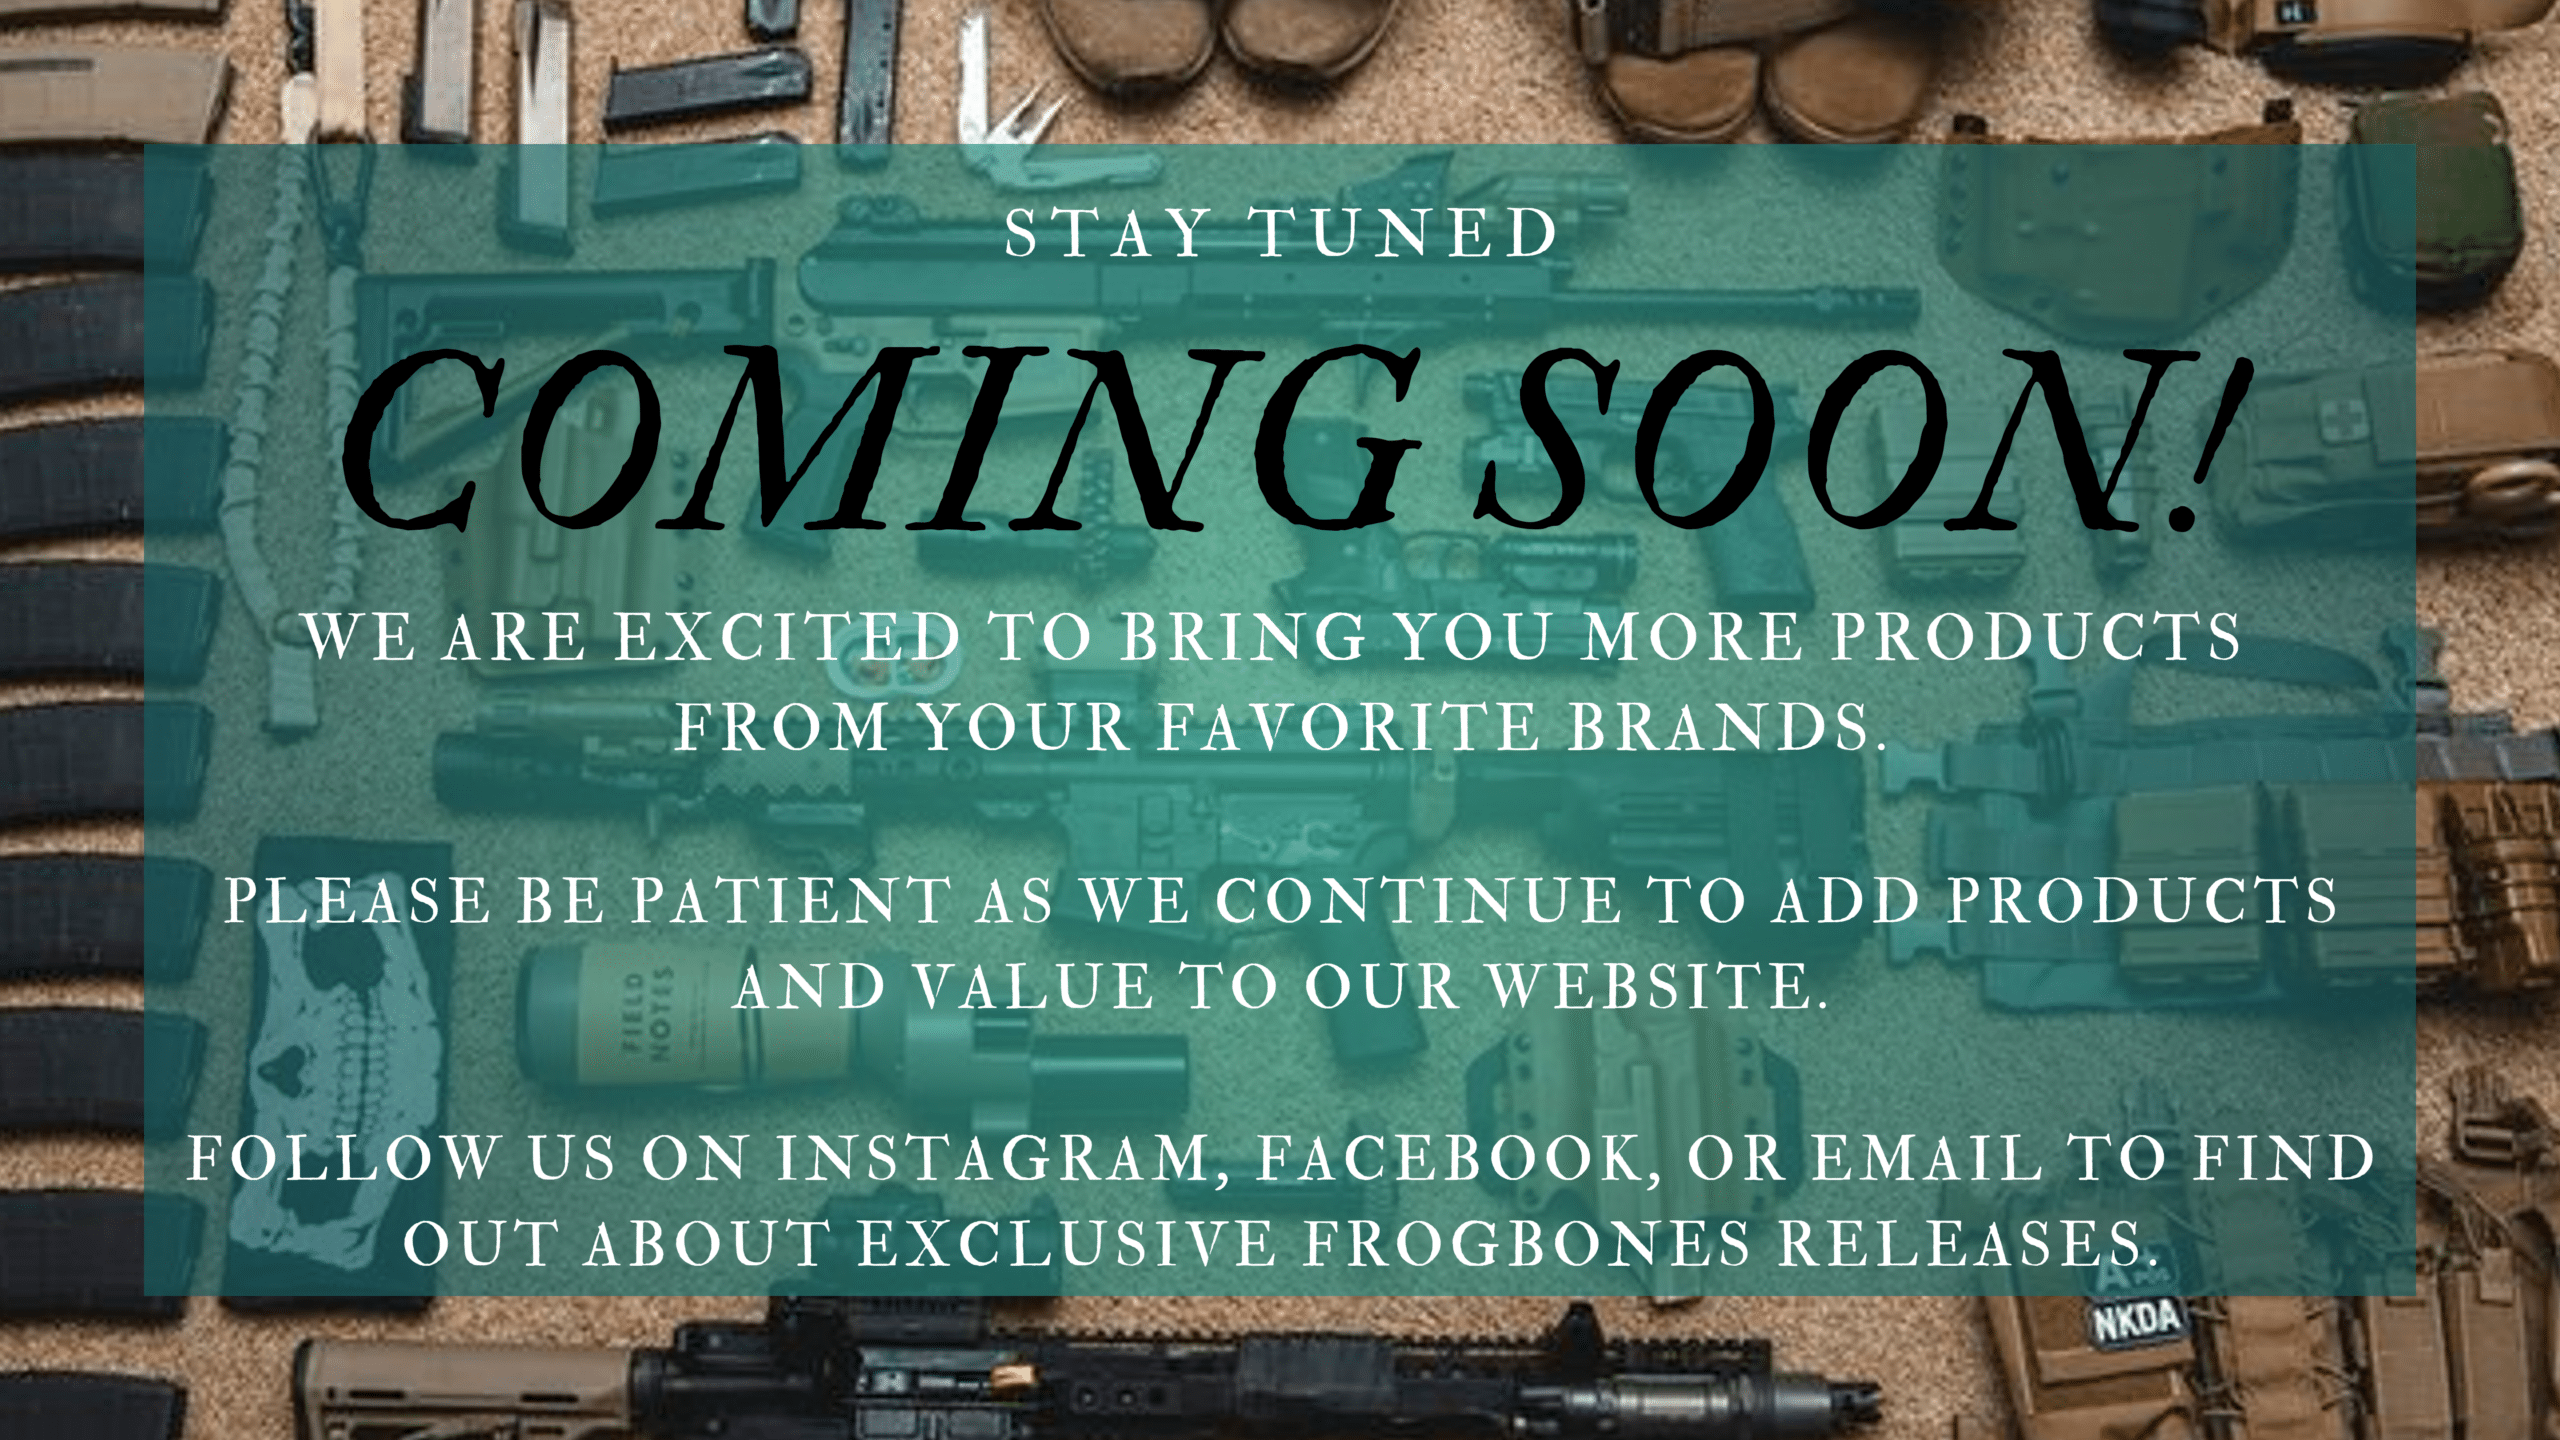 We are excited to bring you more products from your favorite brands. Please be patient as we continue to add products and value to our website. Follow us on Instagram and Facebook to find out about exclusive FrogBones releases.